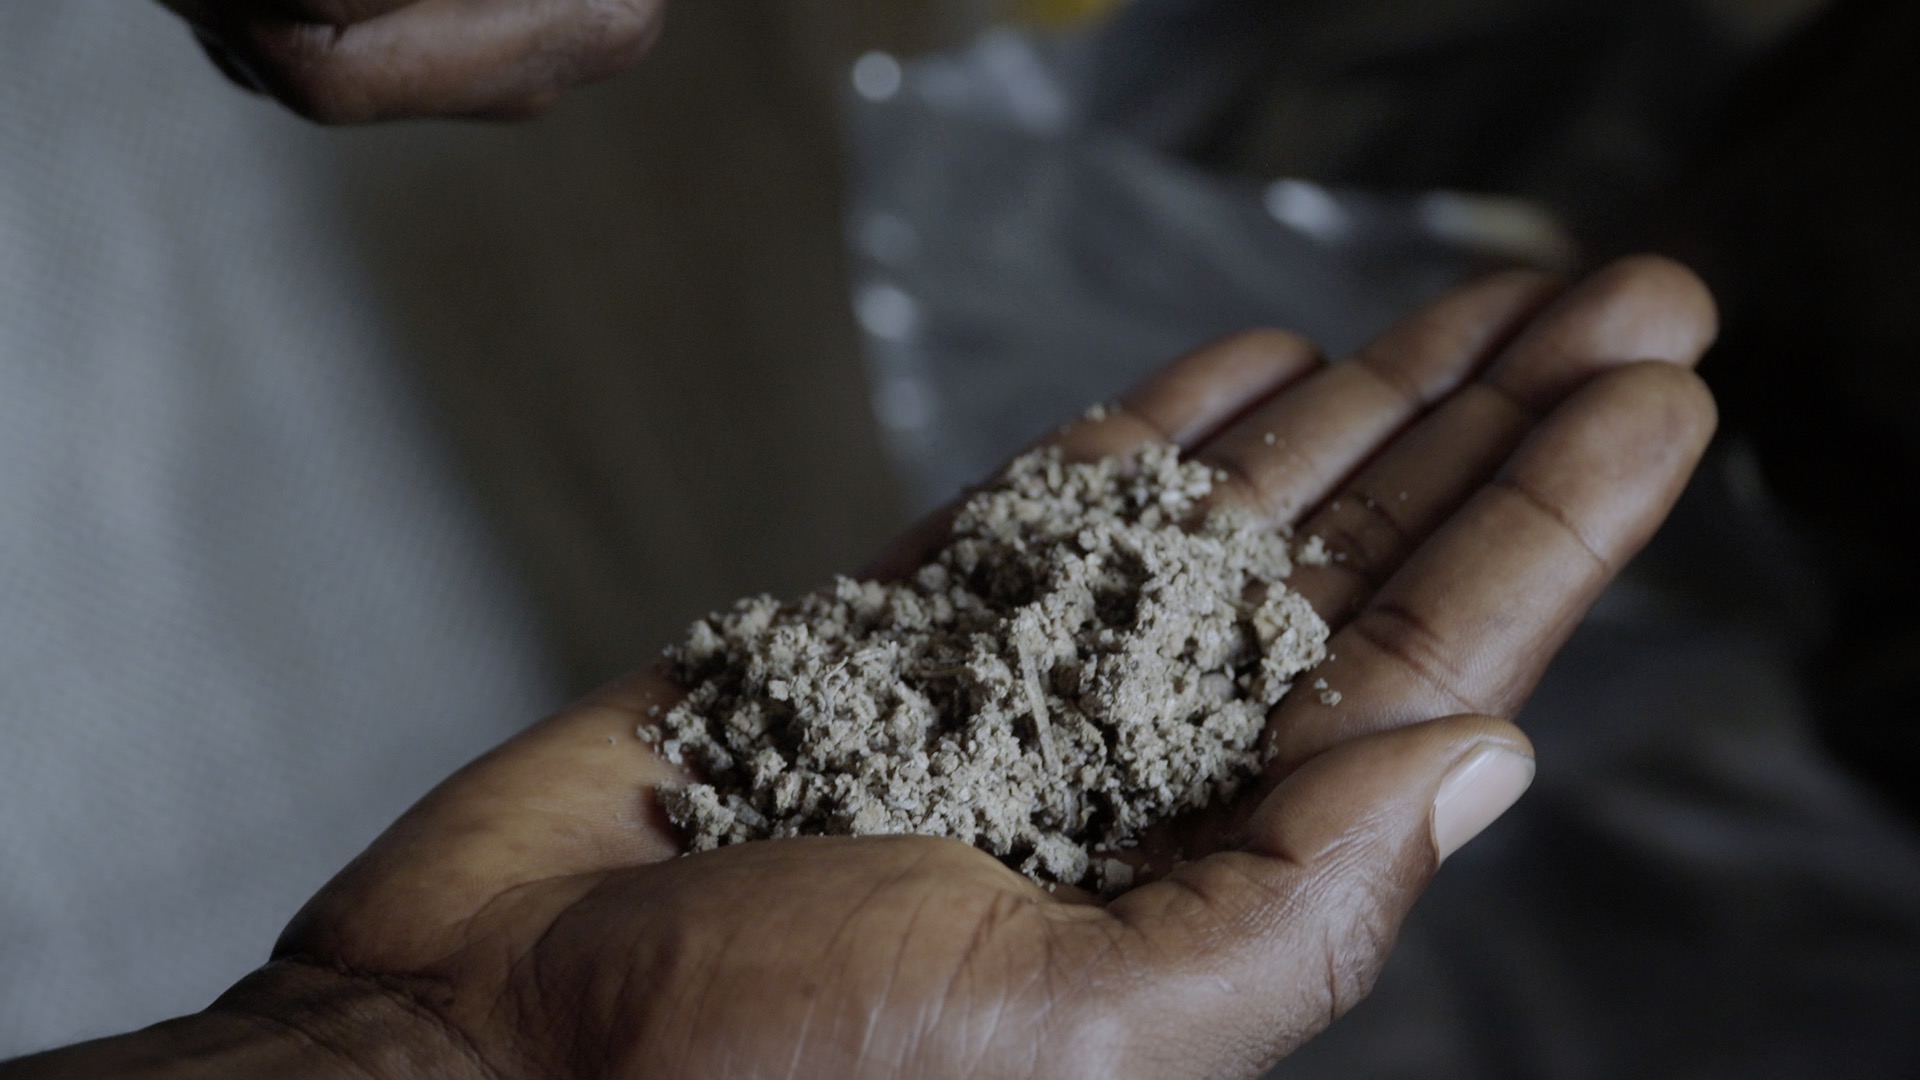 How Illegal Street Drug Kush is Eating Up African Youths